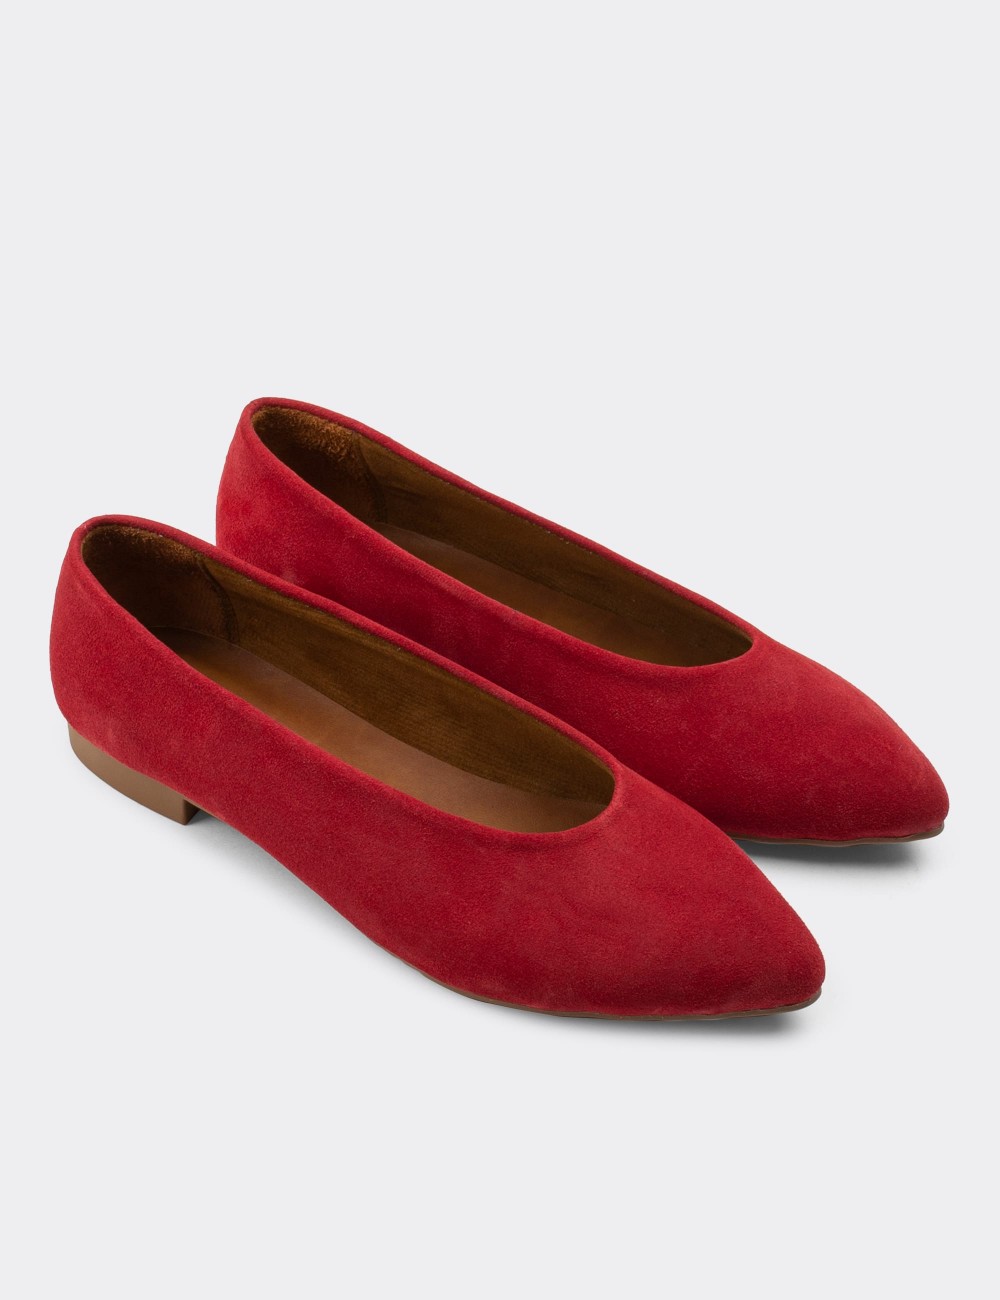 Red Suede Leather Loafers - 01896ZKRMC01